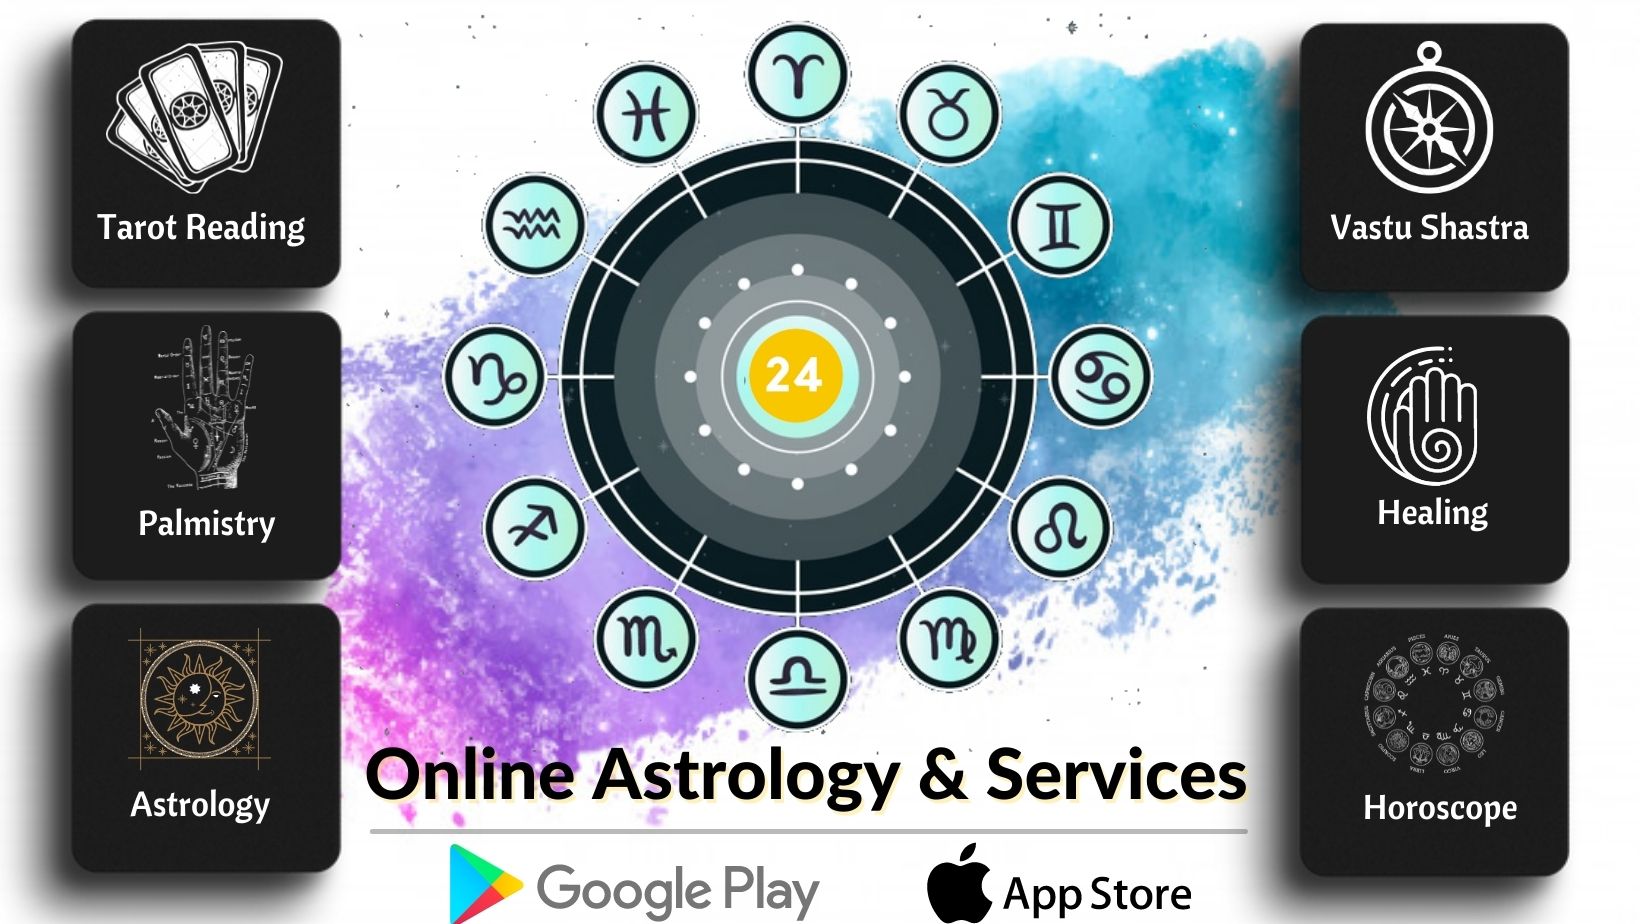 Snitid Astrology &amp; Services

 

BP Google Play «a App Store